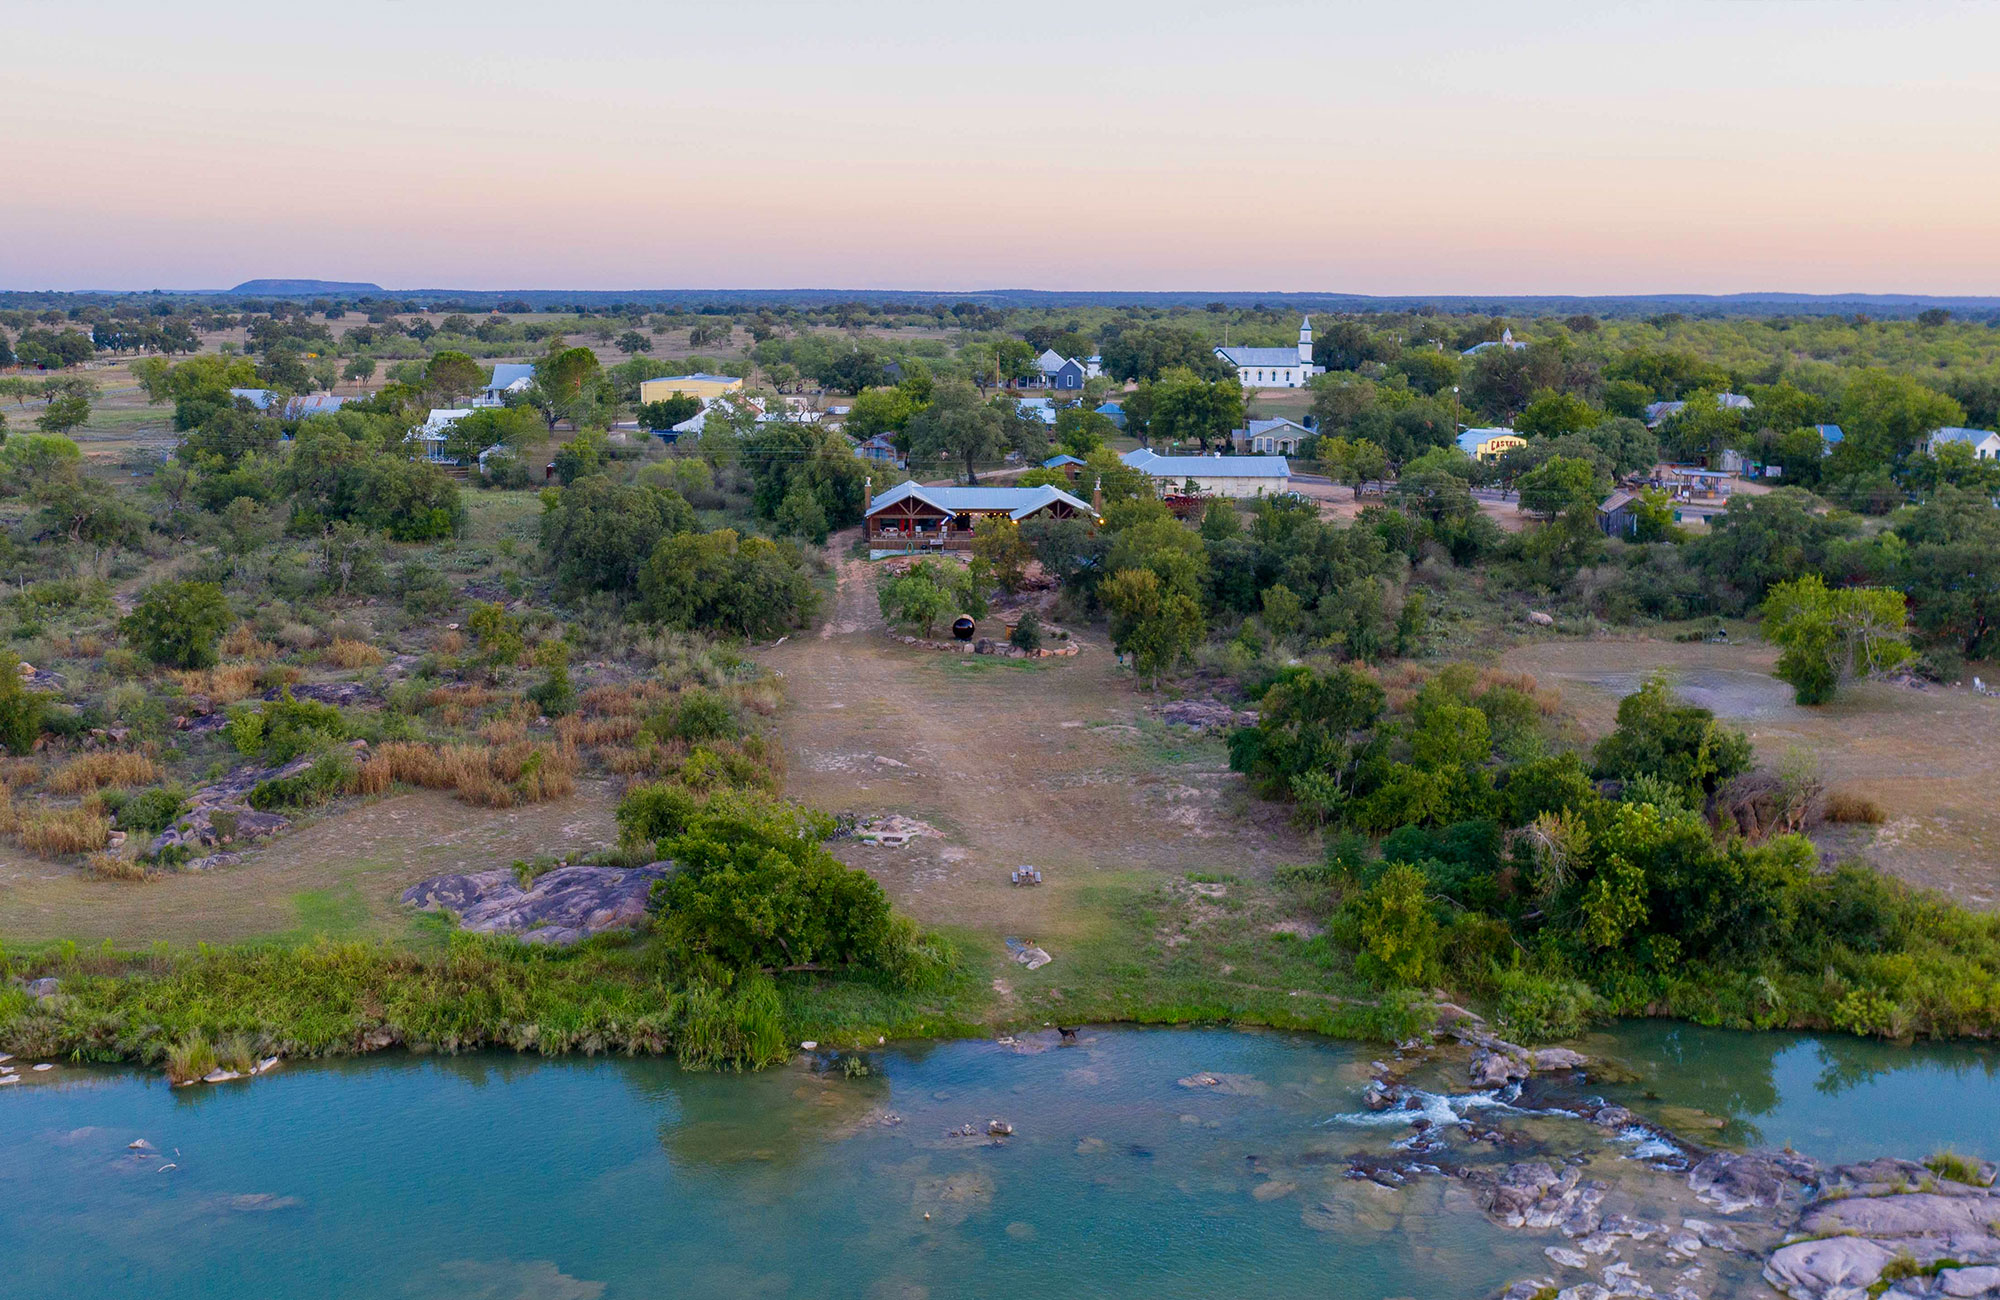 Aerial View of El Castell & Town of Castell, Texas